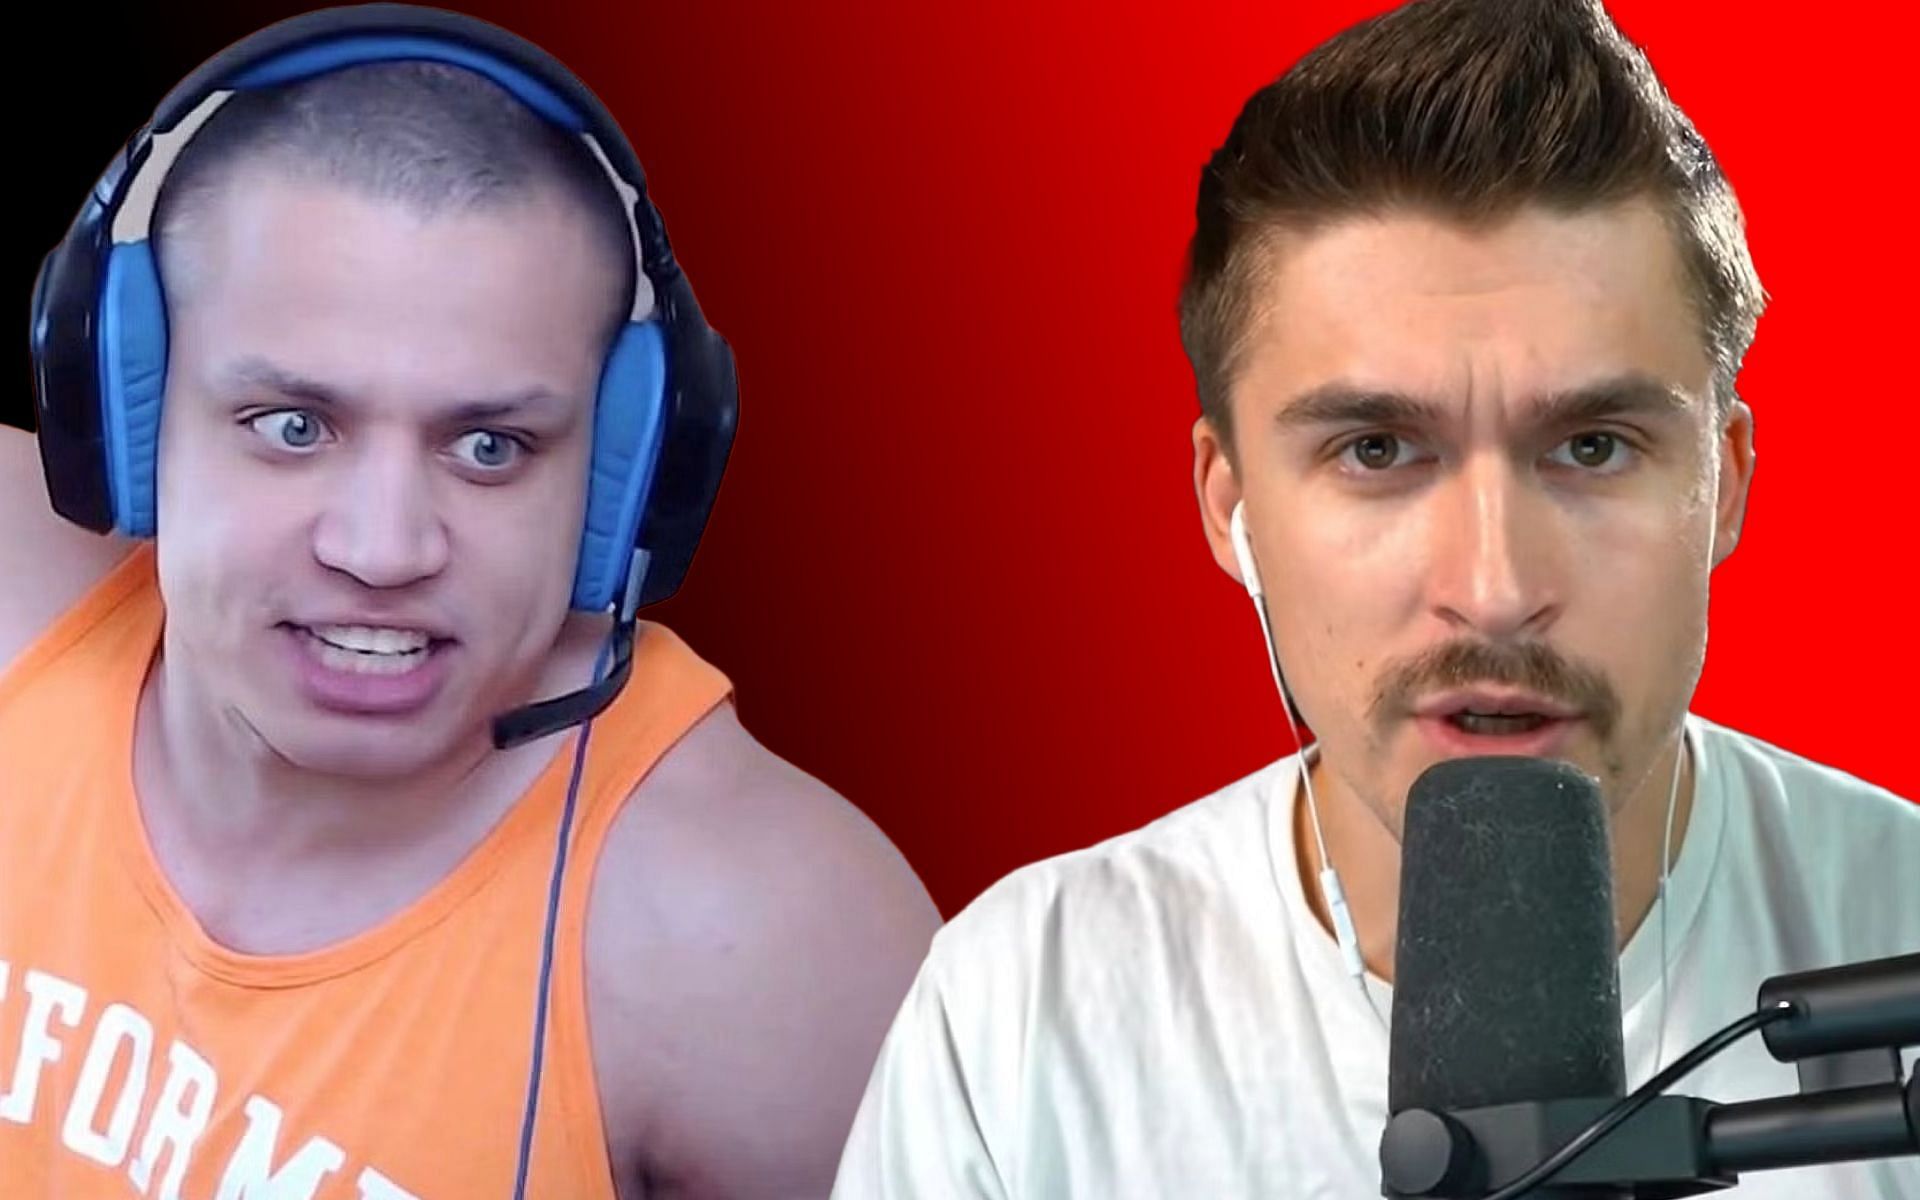 Tyler1 has brutally roasted Ludwig in a livestream (Image via loltyler1/Twitch and Mogul Mail/YouTube)